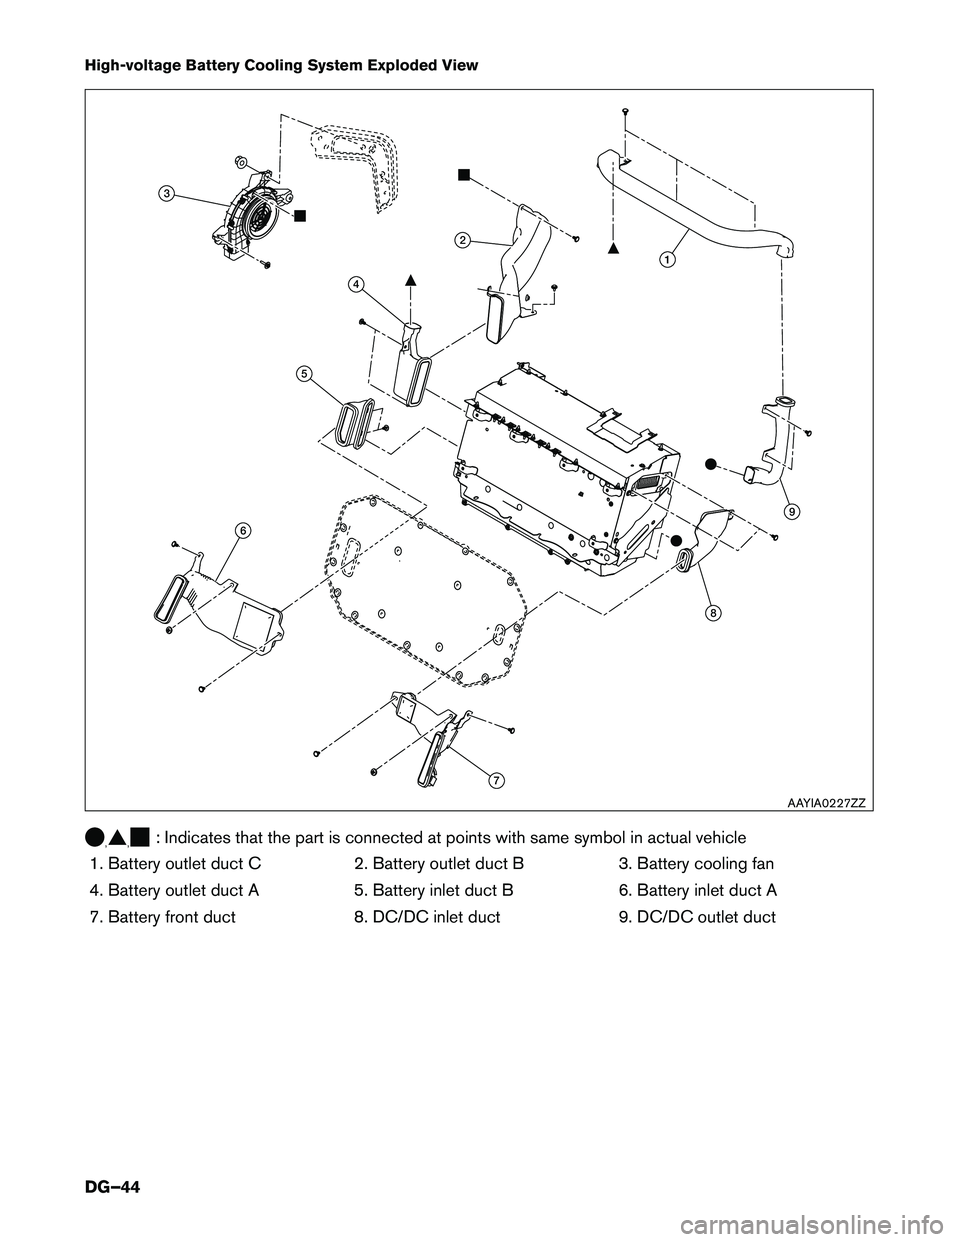 INFINITI Q50 HYBRID 2016  Dismantling Guide High-voltage Battery Cooling System Exploded View
, ,
: Indicates that the part is connected at points with same symbol in actual vehicle
1.
Battery outlet duct C 2. Battery outlet duct B 3. Battery c